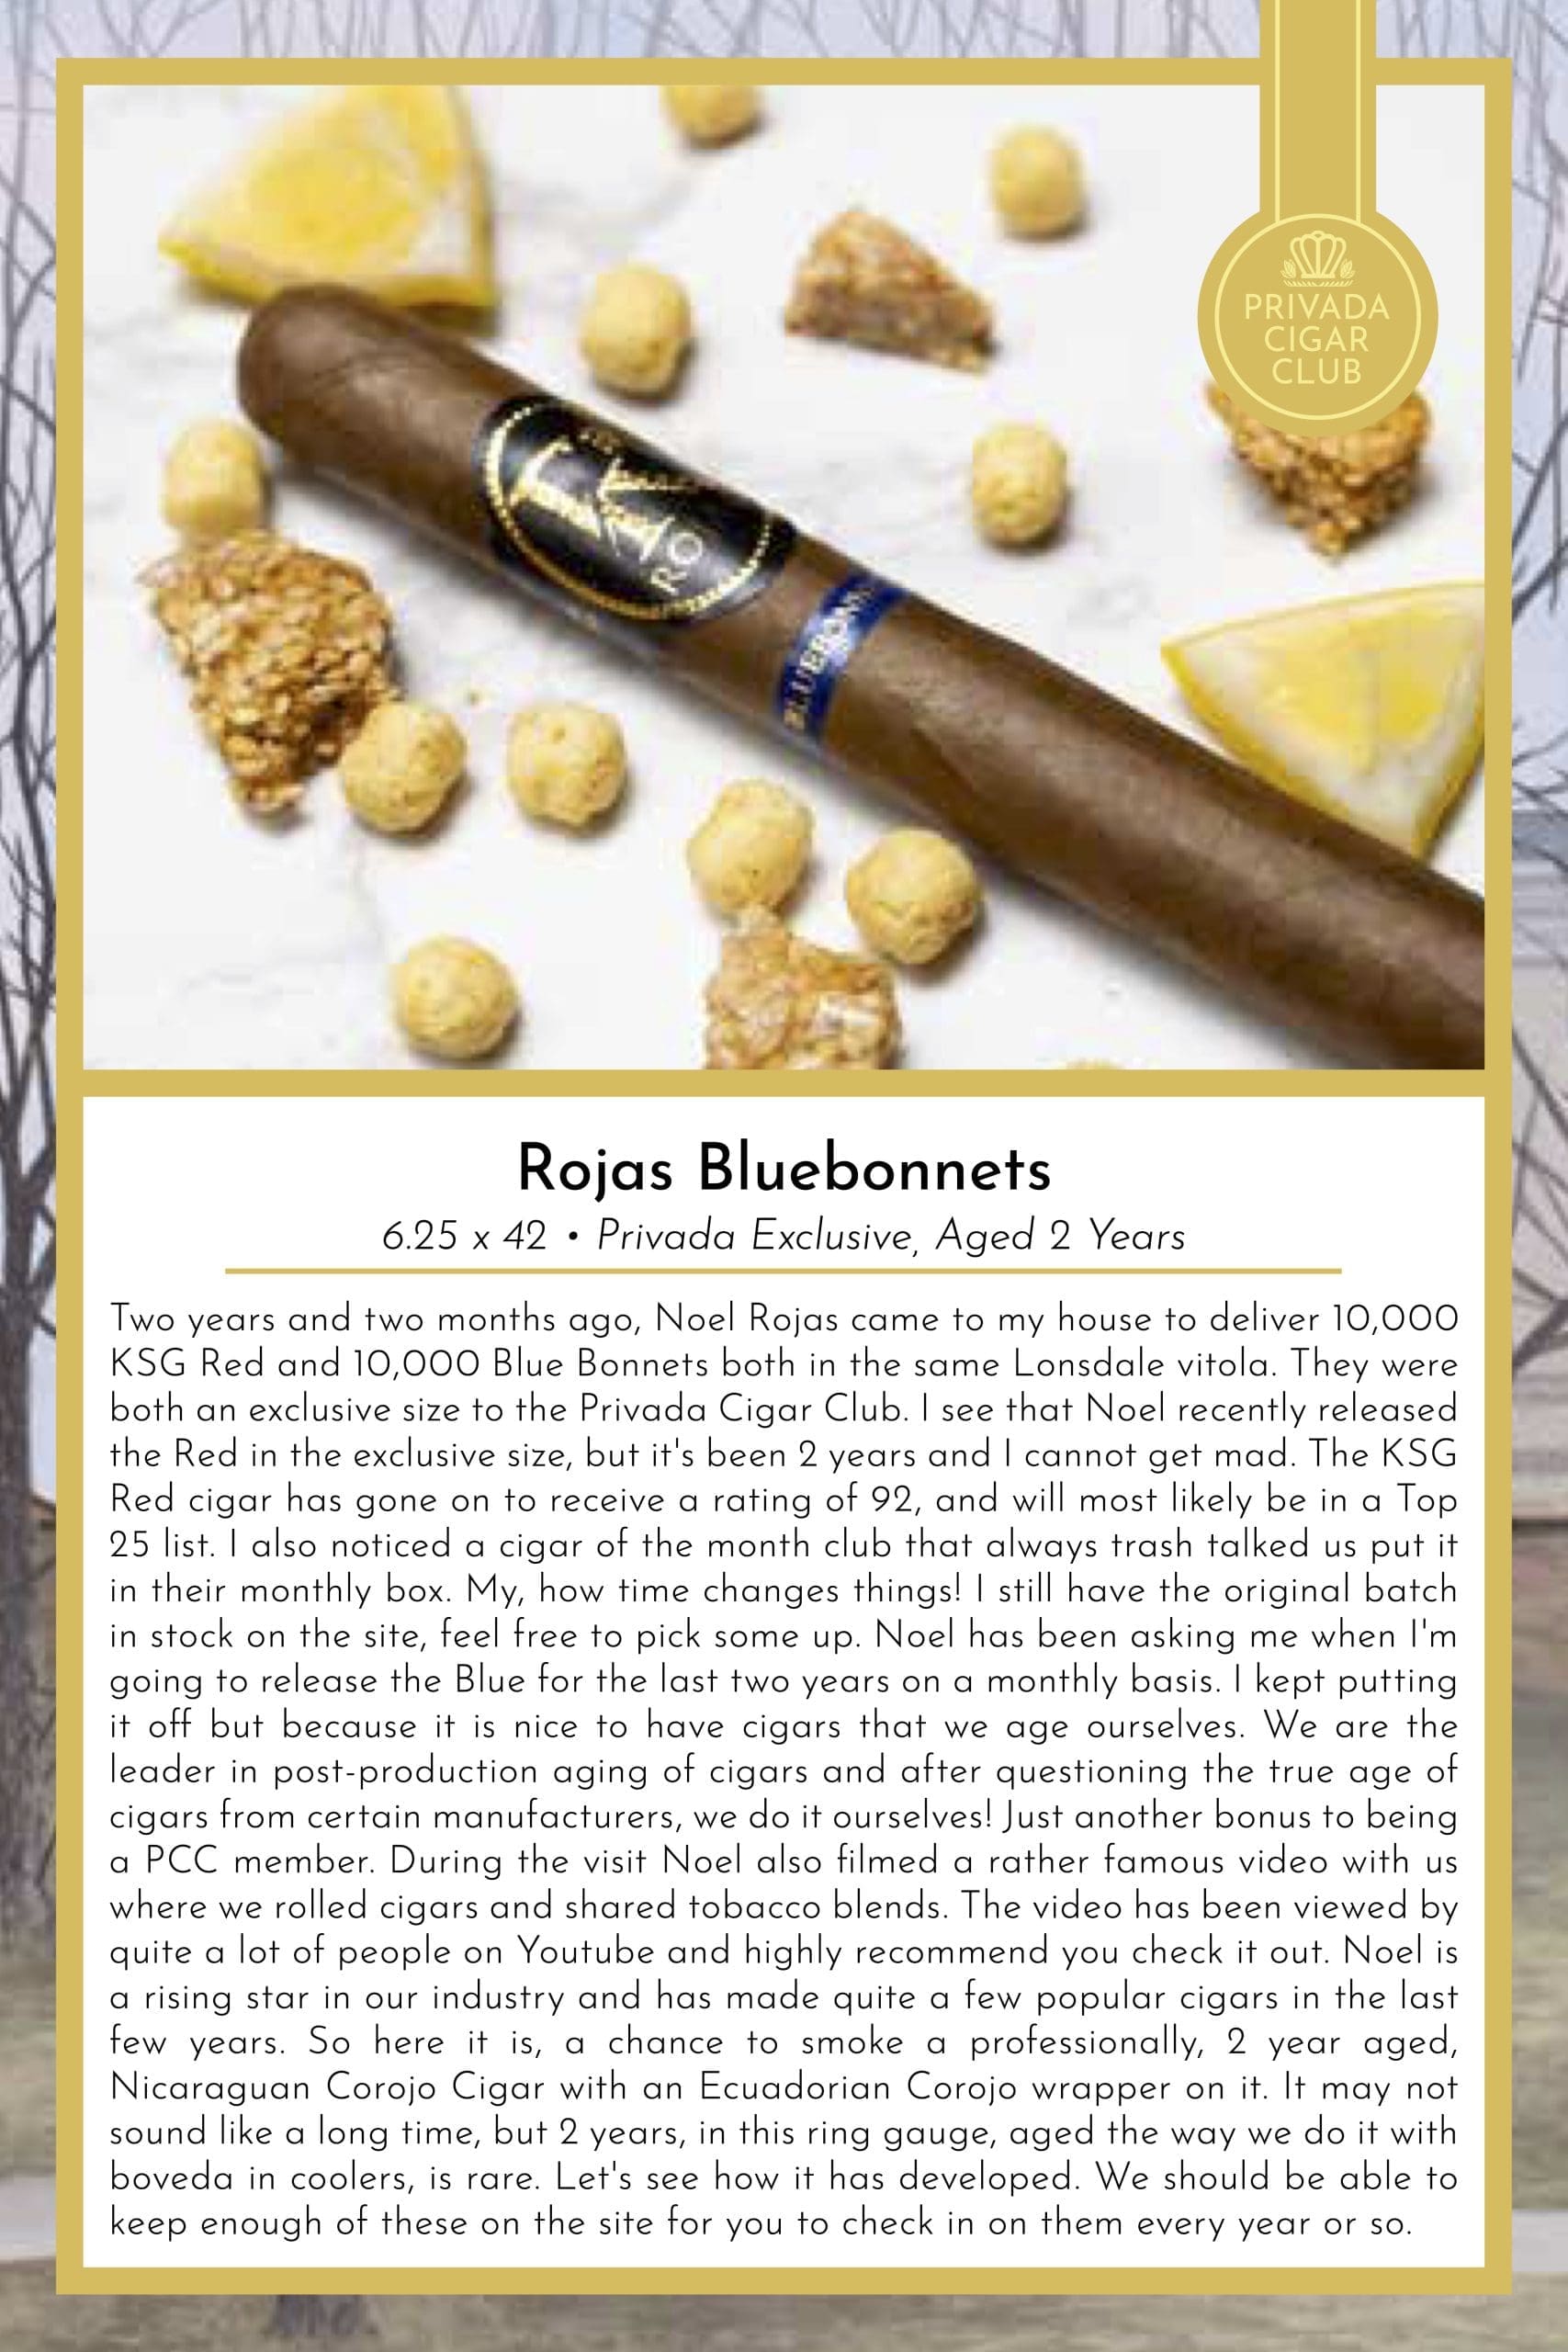 Rojas Bluebonnets Taste Card-6.25x42 Privada Exclusive -Aged 2Years